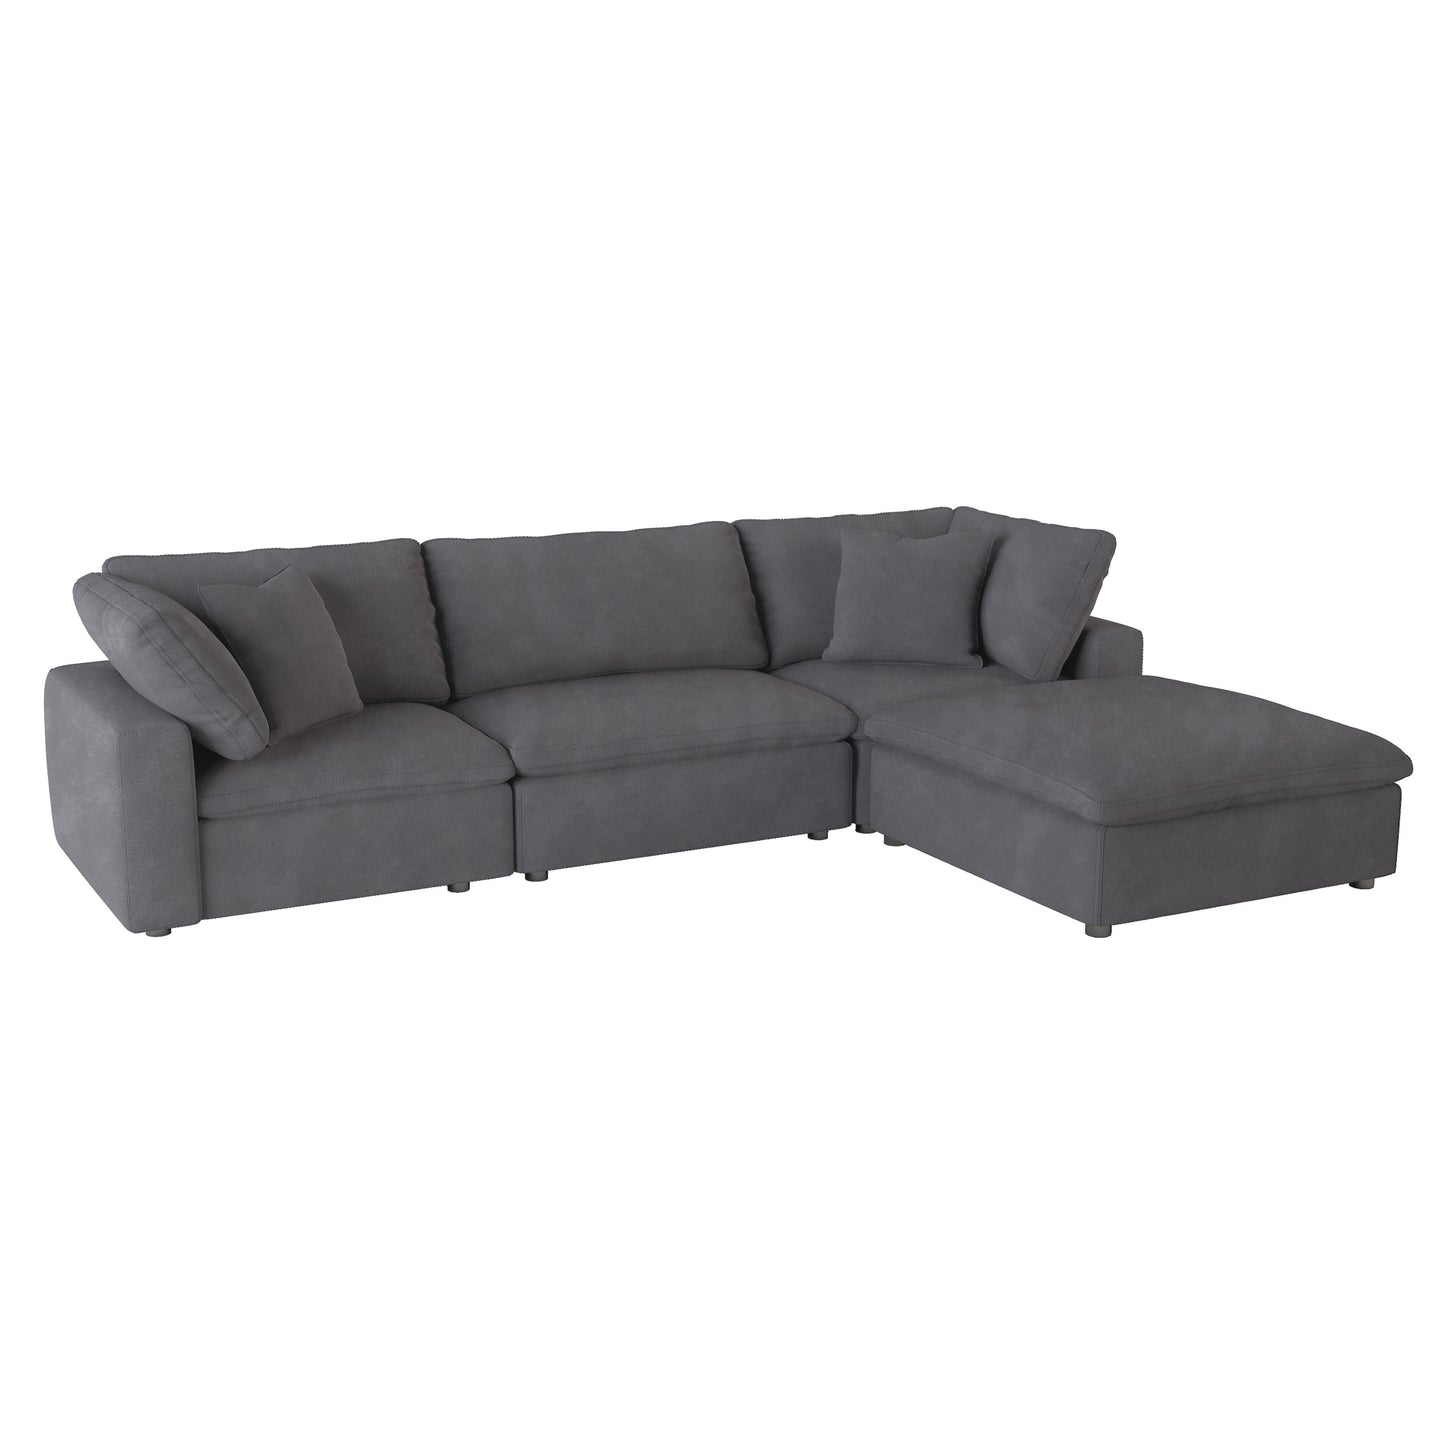 9546GY*6OT 6-Piece Modular Sectional with Ottoman